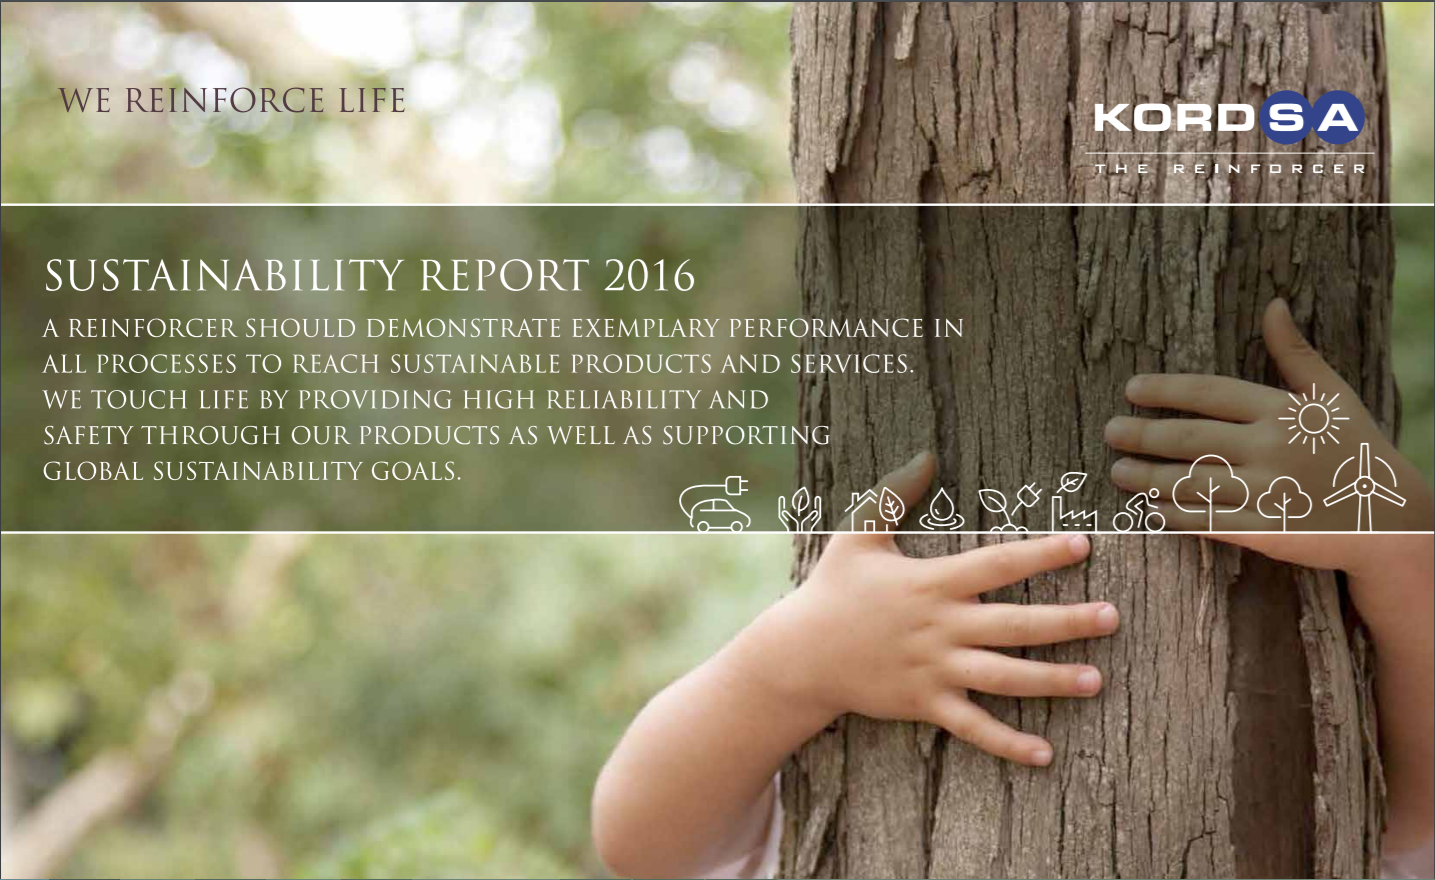 Kordsa releases third sustainability report